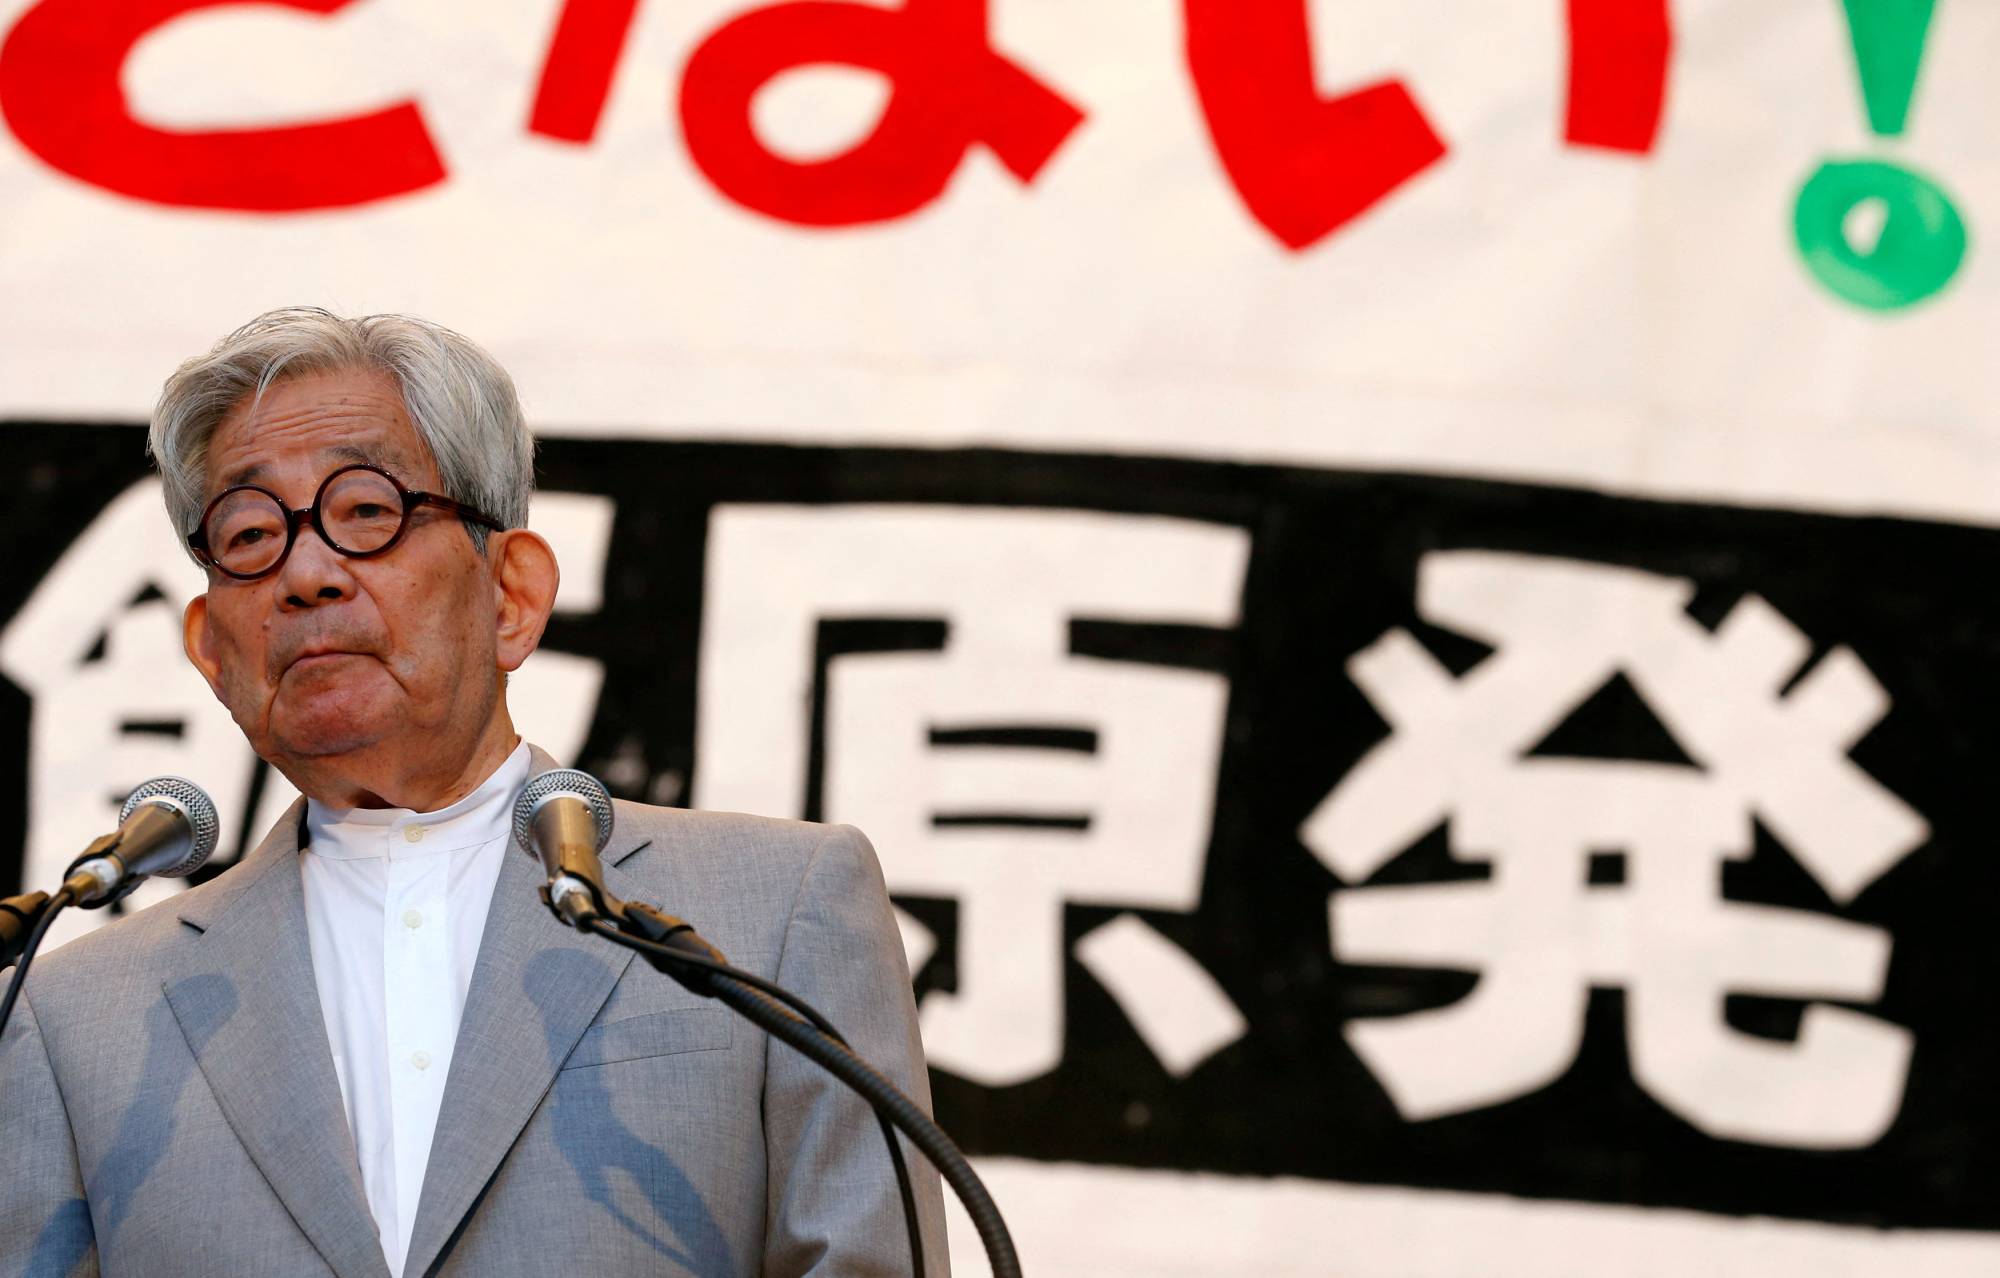 Nobel Prize-winning author Kenzaburo Oe makes a speech at a rally against a possible restart of nuclear reactors, in Tokyo in June 2012. | REUTERS